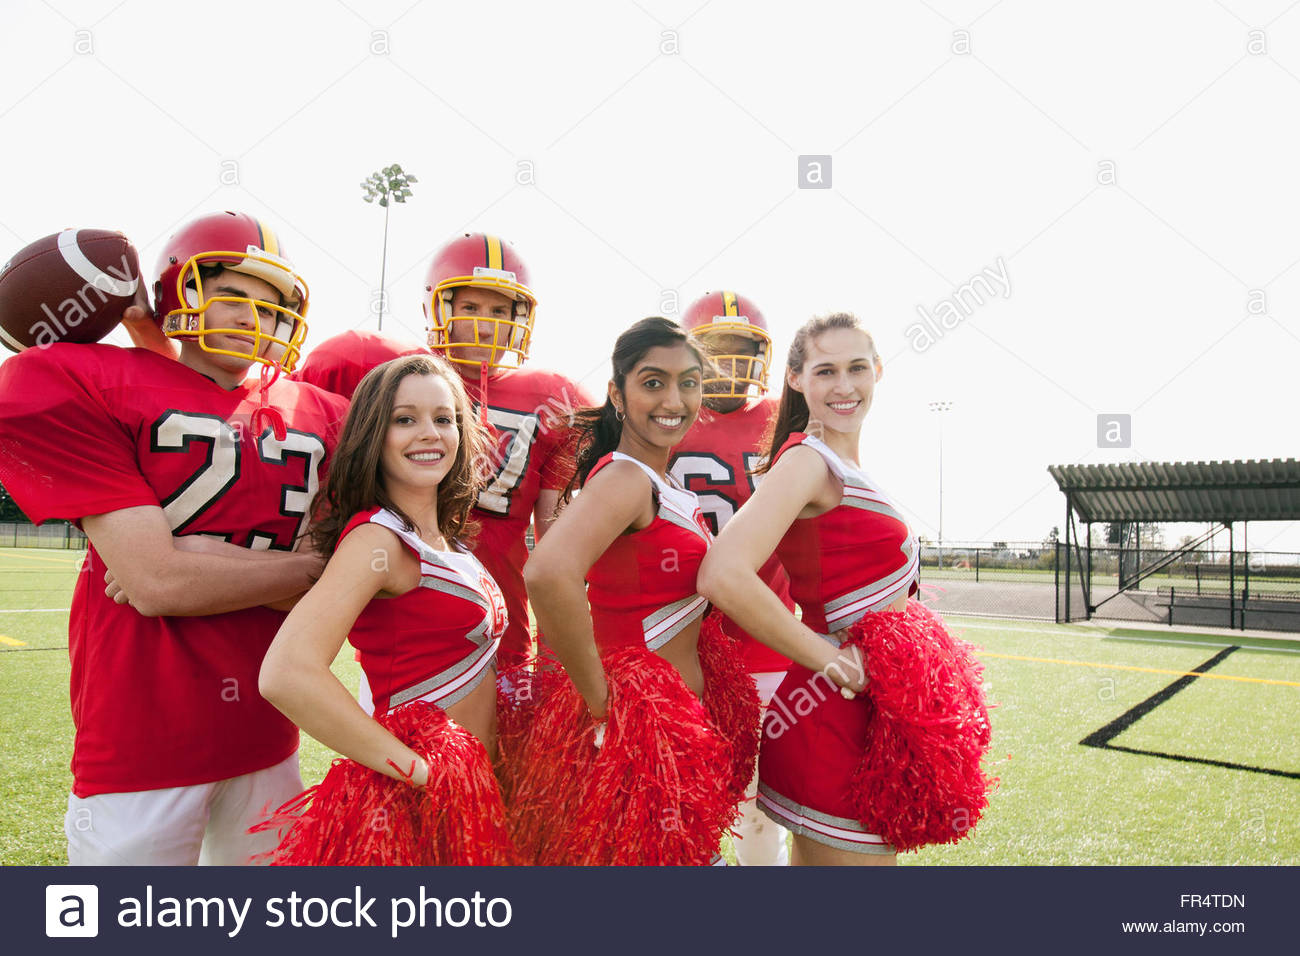 college football players with cheerleaders Stock Photo